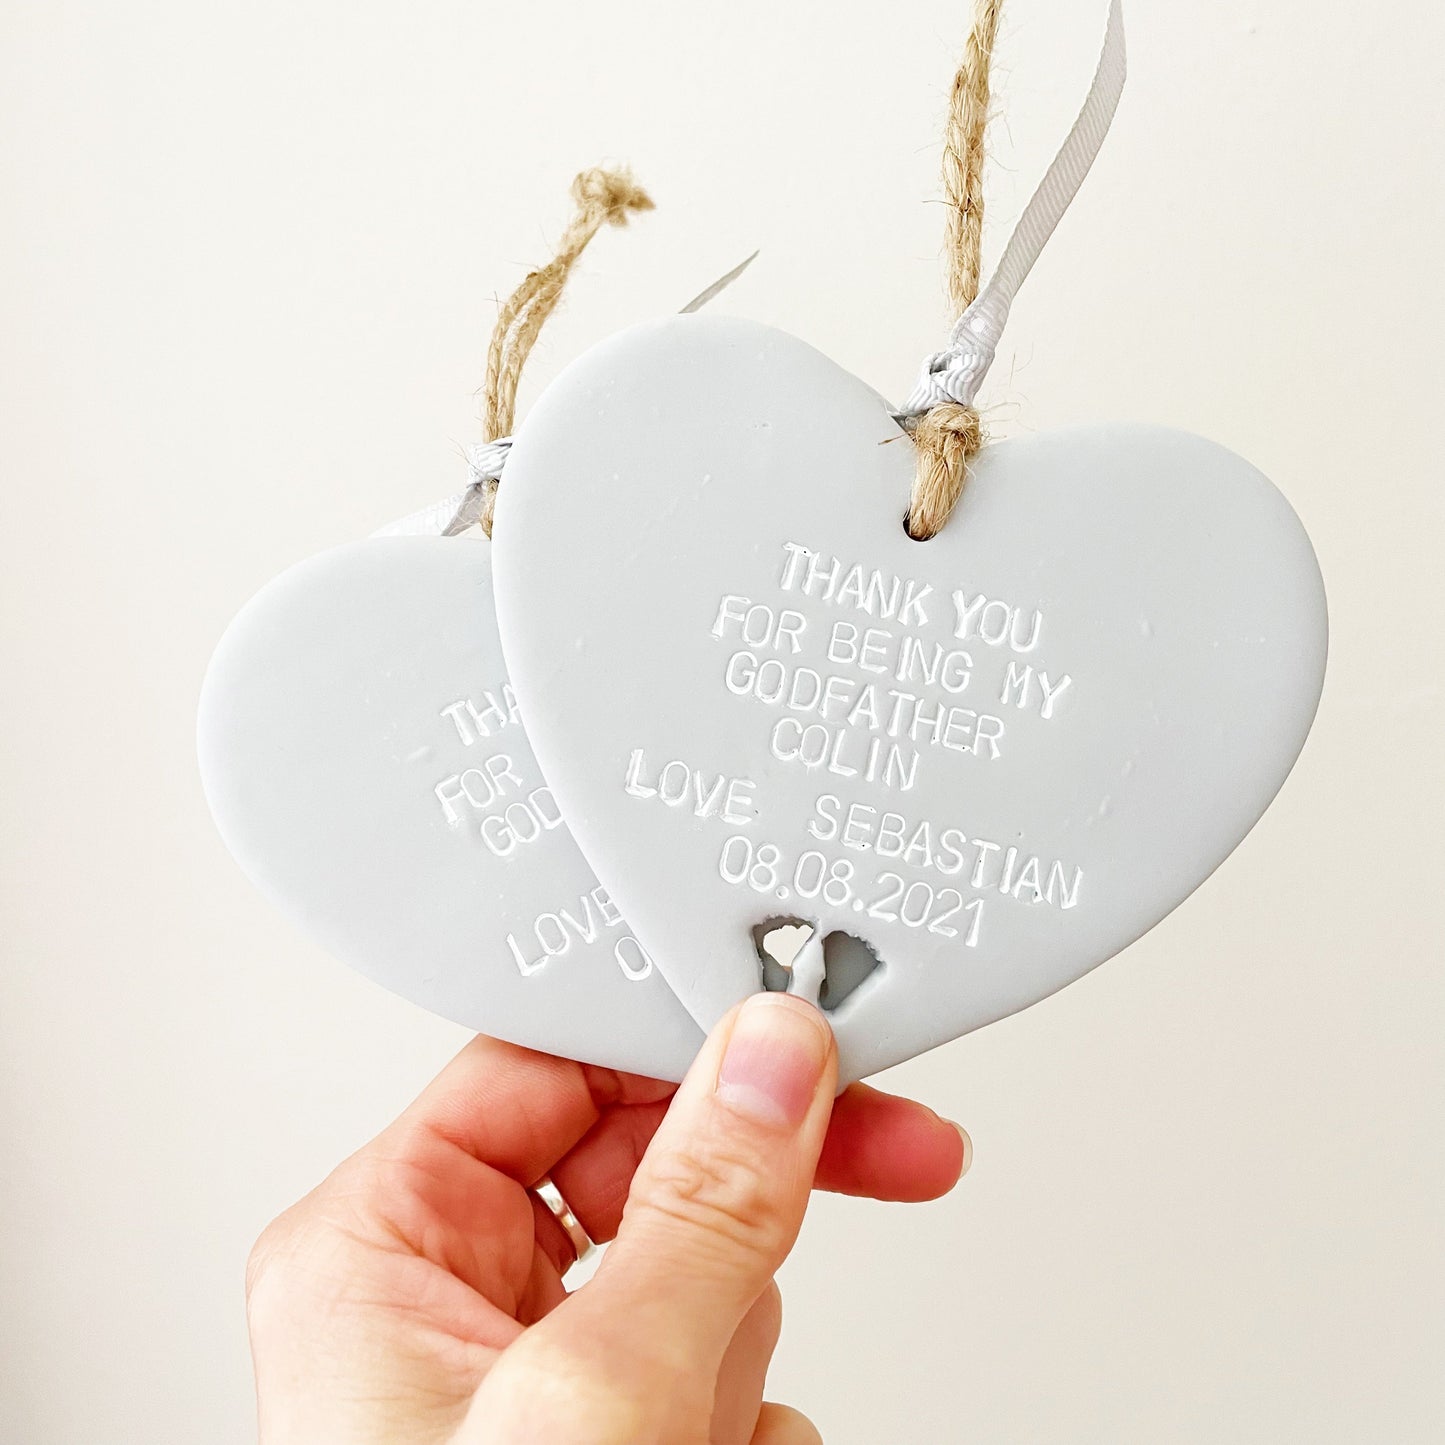 Personalised Godfather gift, 2 grey clay hanging hearts with baby feet cut out of the bottom, the heart is personalised with THANK YOU FOR BEING MY GODFATHER COLIN LOVE. SEBASTIAN 08.08.2021